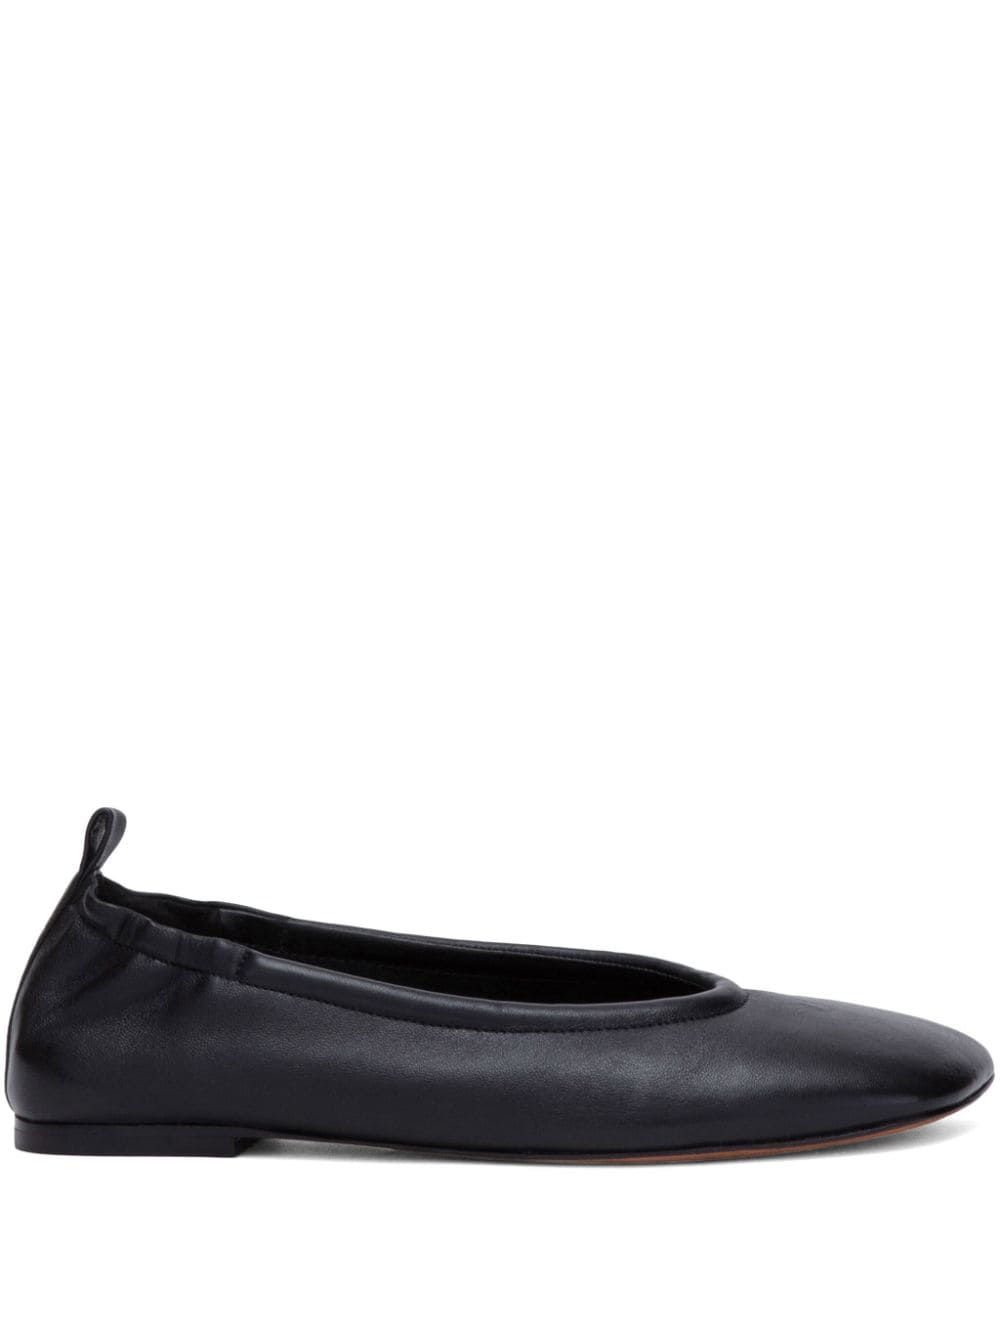 Image 1 of 3.1 Phillip Lim ID leather ballerina shoes